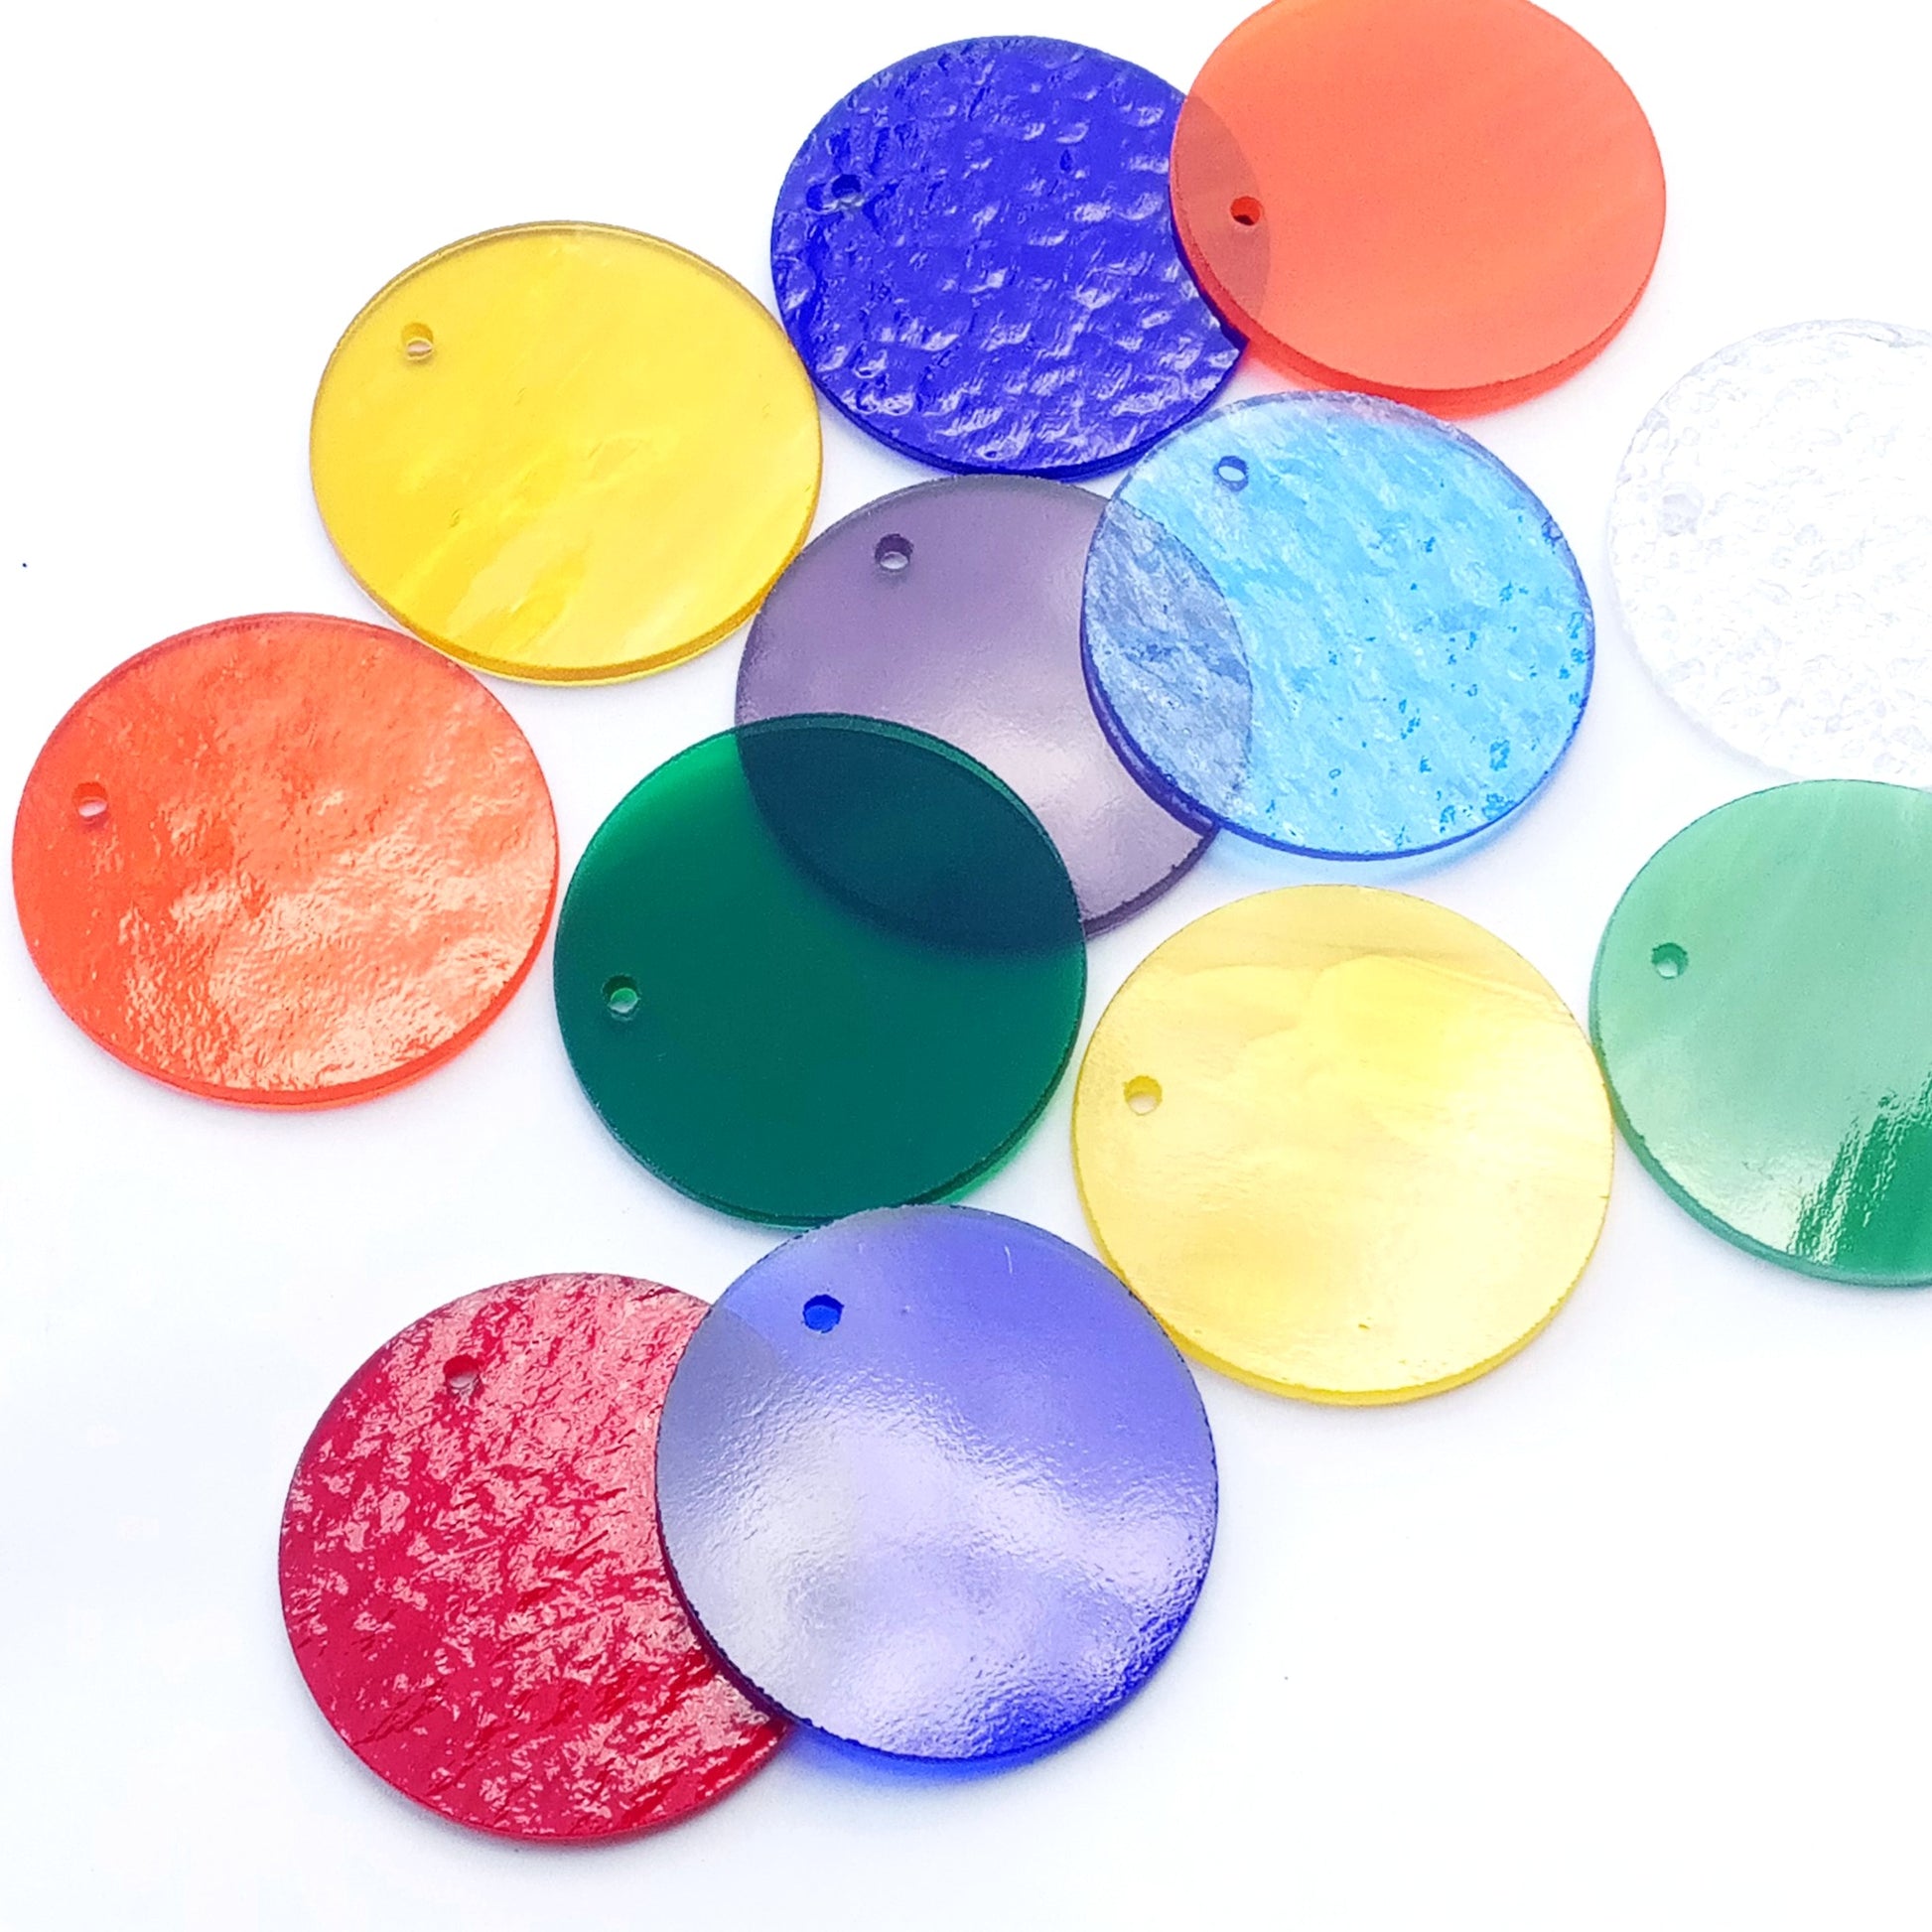 Precut Stained Glass Circles with Holes Drilled for Hanging, 2" Glass Circles for Windchimes, Ornaments, Glass Art, Assorted Colors, All Translucent and Wispy Stained Glass